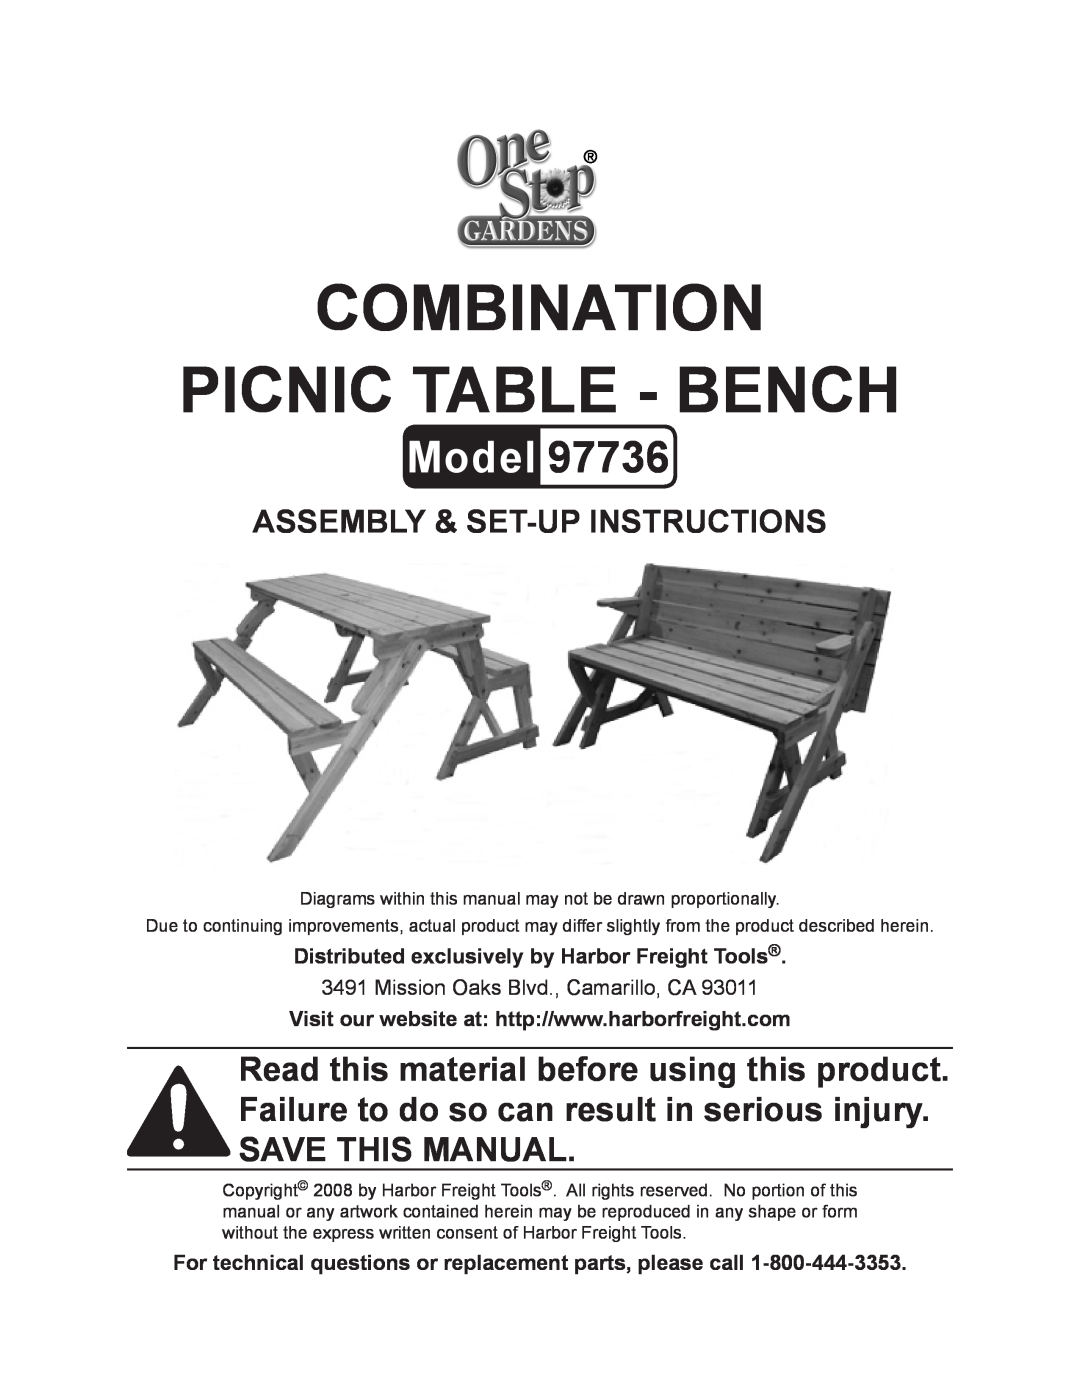 Harbor Freight Tools 97736 manual Assembly & SET-UP Instructions, Distributed exclusively by Harbor Freight Tools, Model 